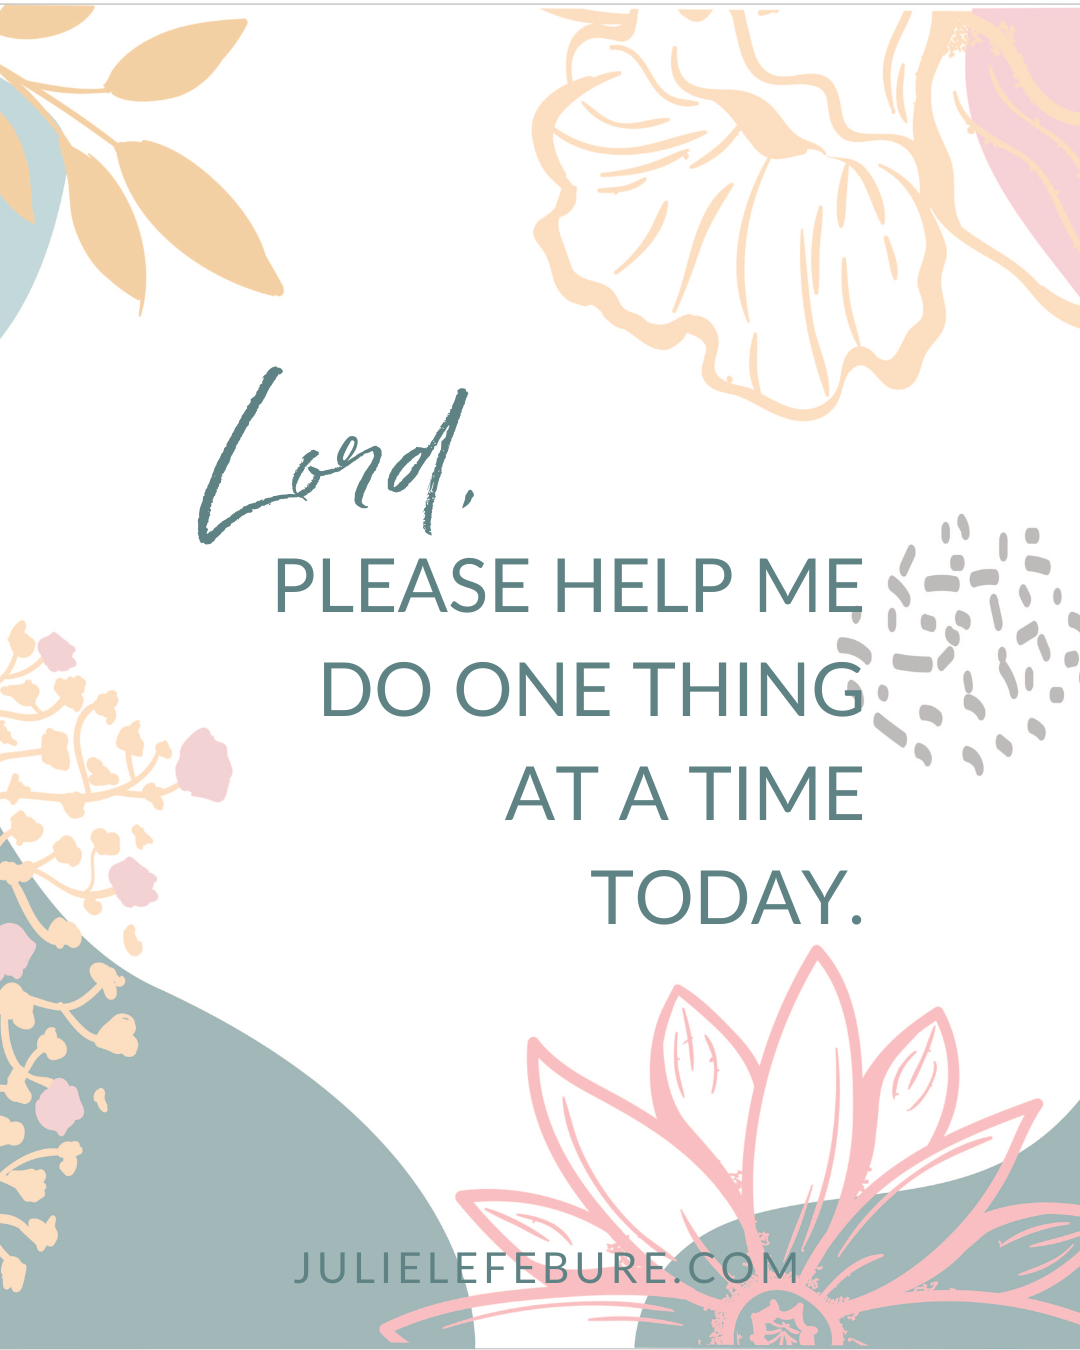 Lord, help me do one thing at a time today